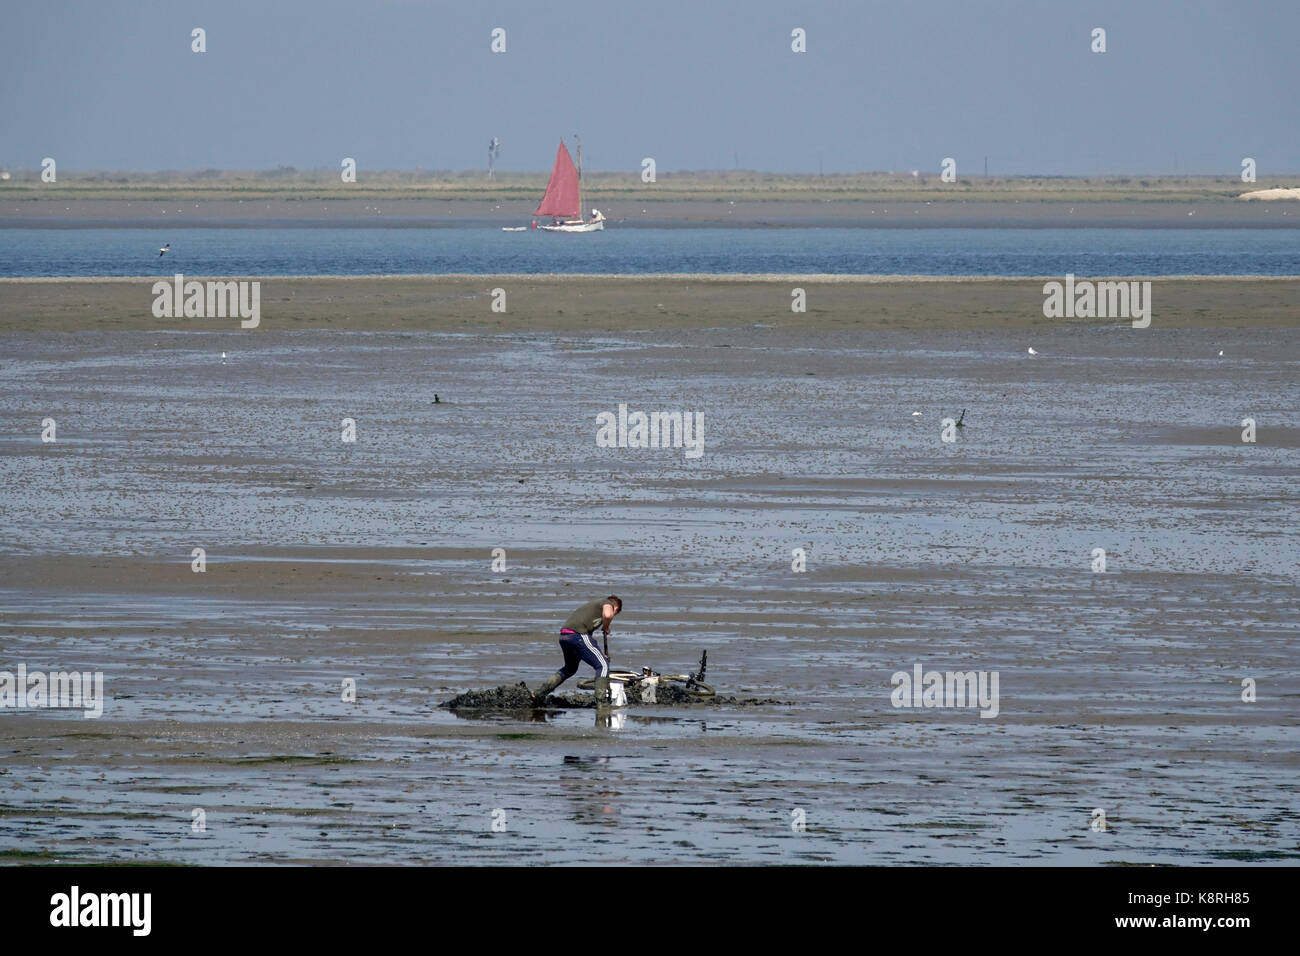 Digging for lugworm or sandworm (Arenicola marina) at South Swale, Kent. Looking towards the Isle of Sheppey. Stock Photo